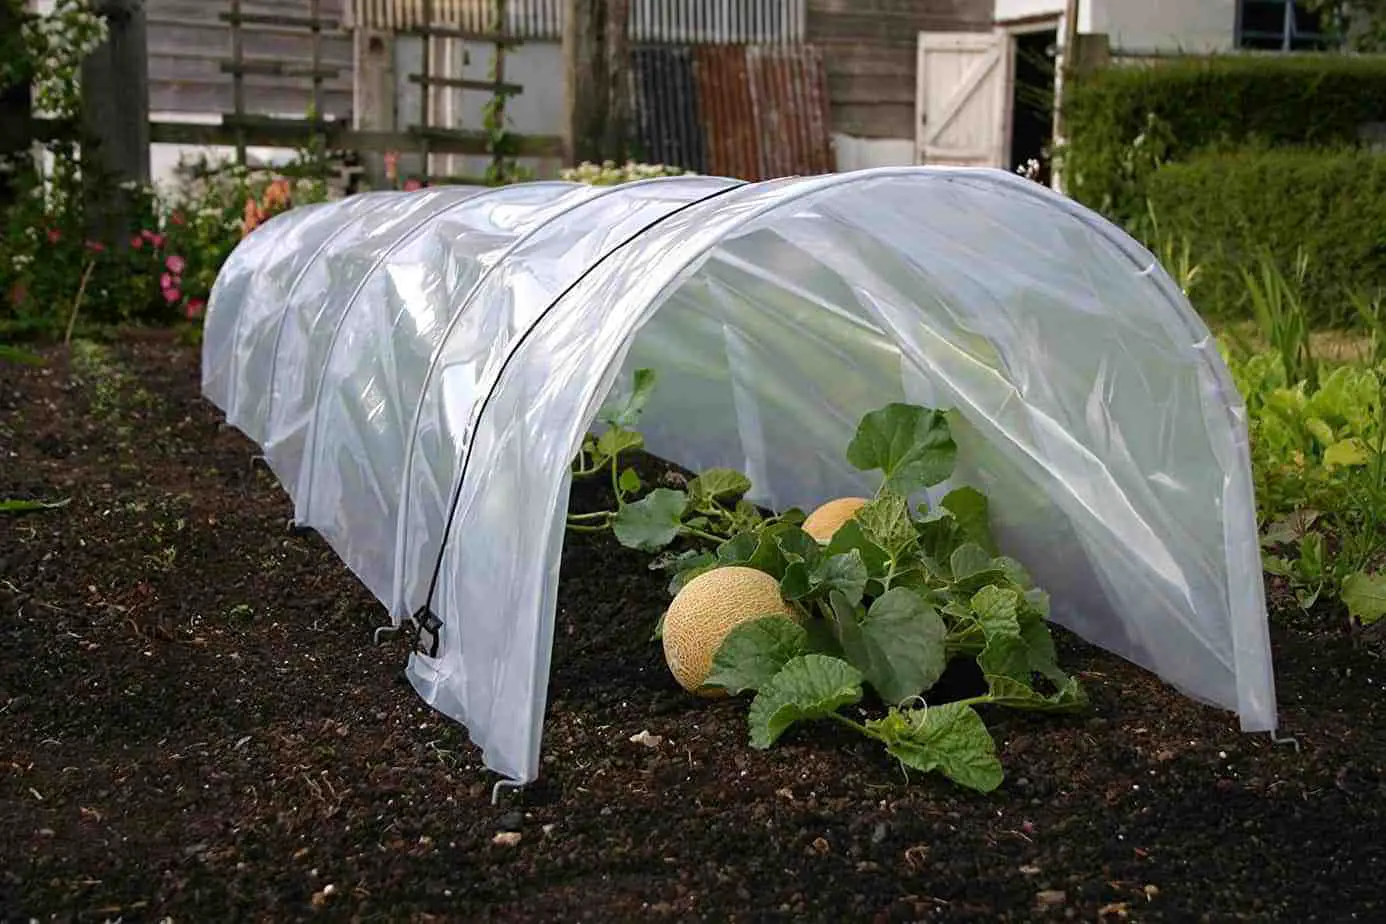 200” X 40“ X 40” Portable Water Proof Garden Tunnel Greenhouse Little kuku Greenhouse Suitable for Indoor and Outdoor 